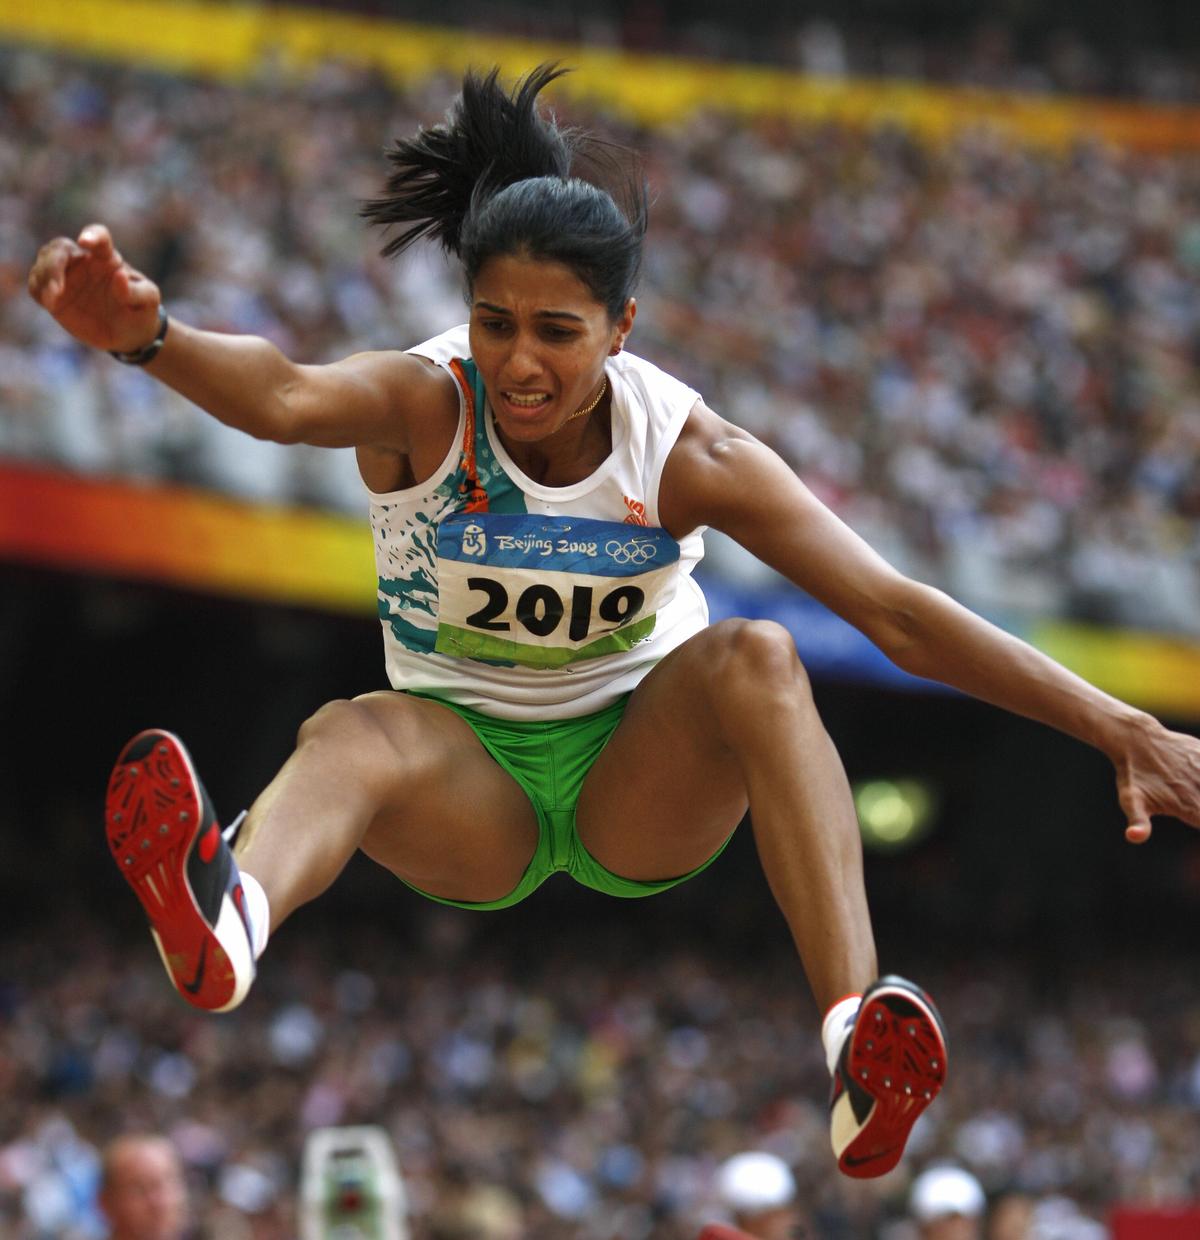 High-flyer: Anju is one of India’s most decorated athletes. Years after retiring, she still holds the national long jump record. | Photo credit: Getty Images